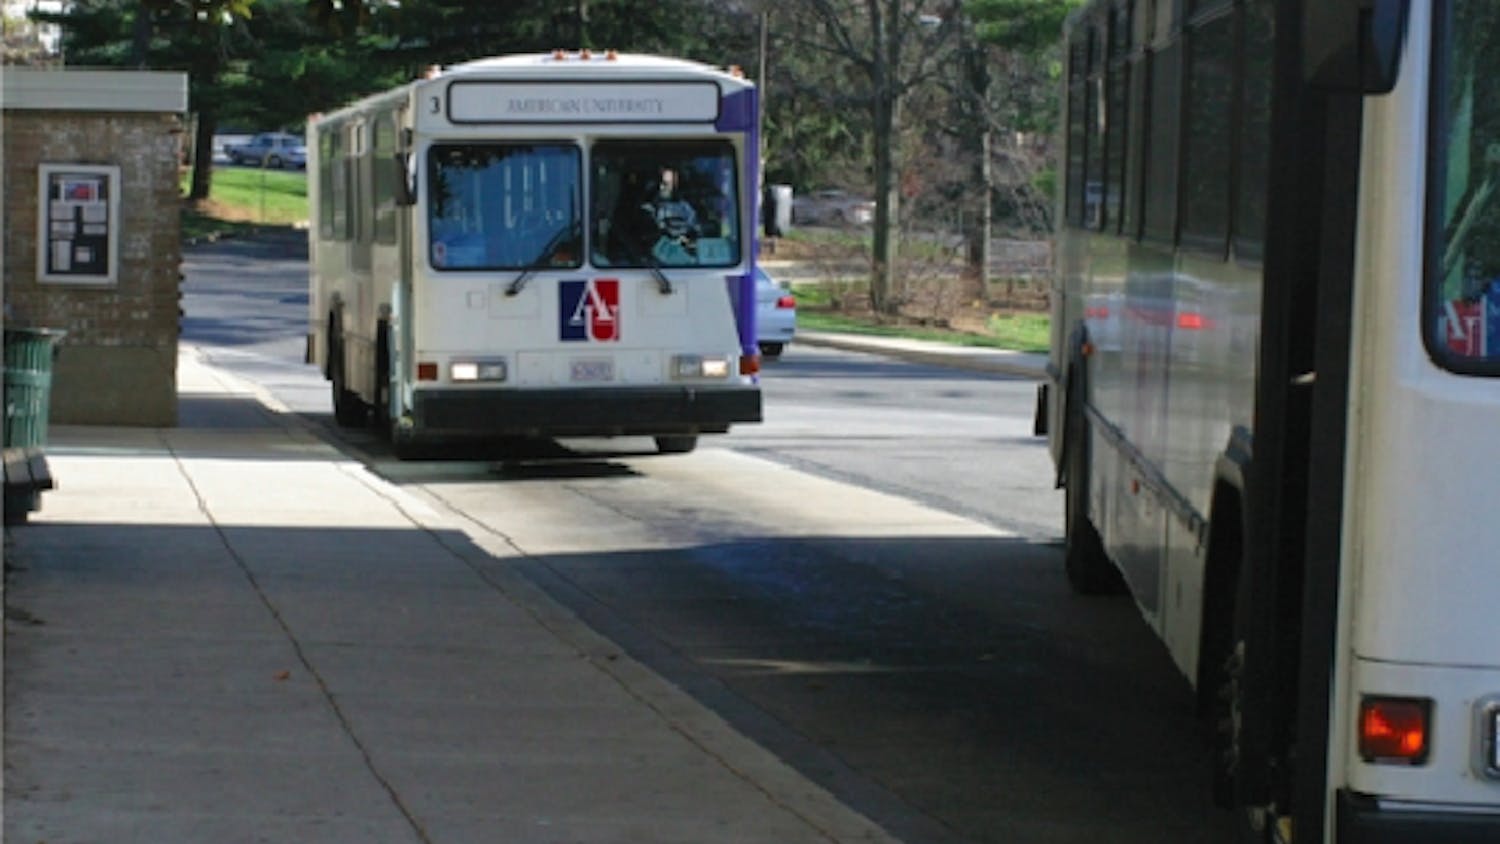 Shuttle drivers typically receive one 30-minute break during their 8.5-hour shifts. Other AU maintenance staffers receive two additional 15-minute breaks during shifts of the same length.